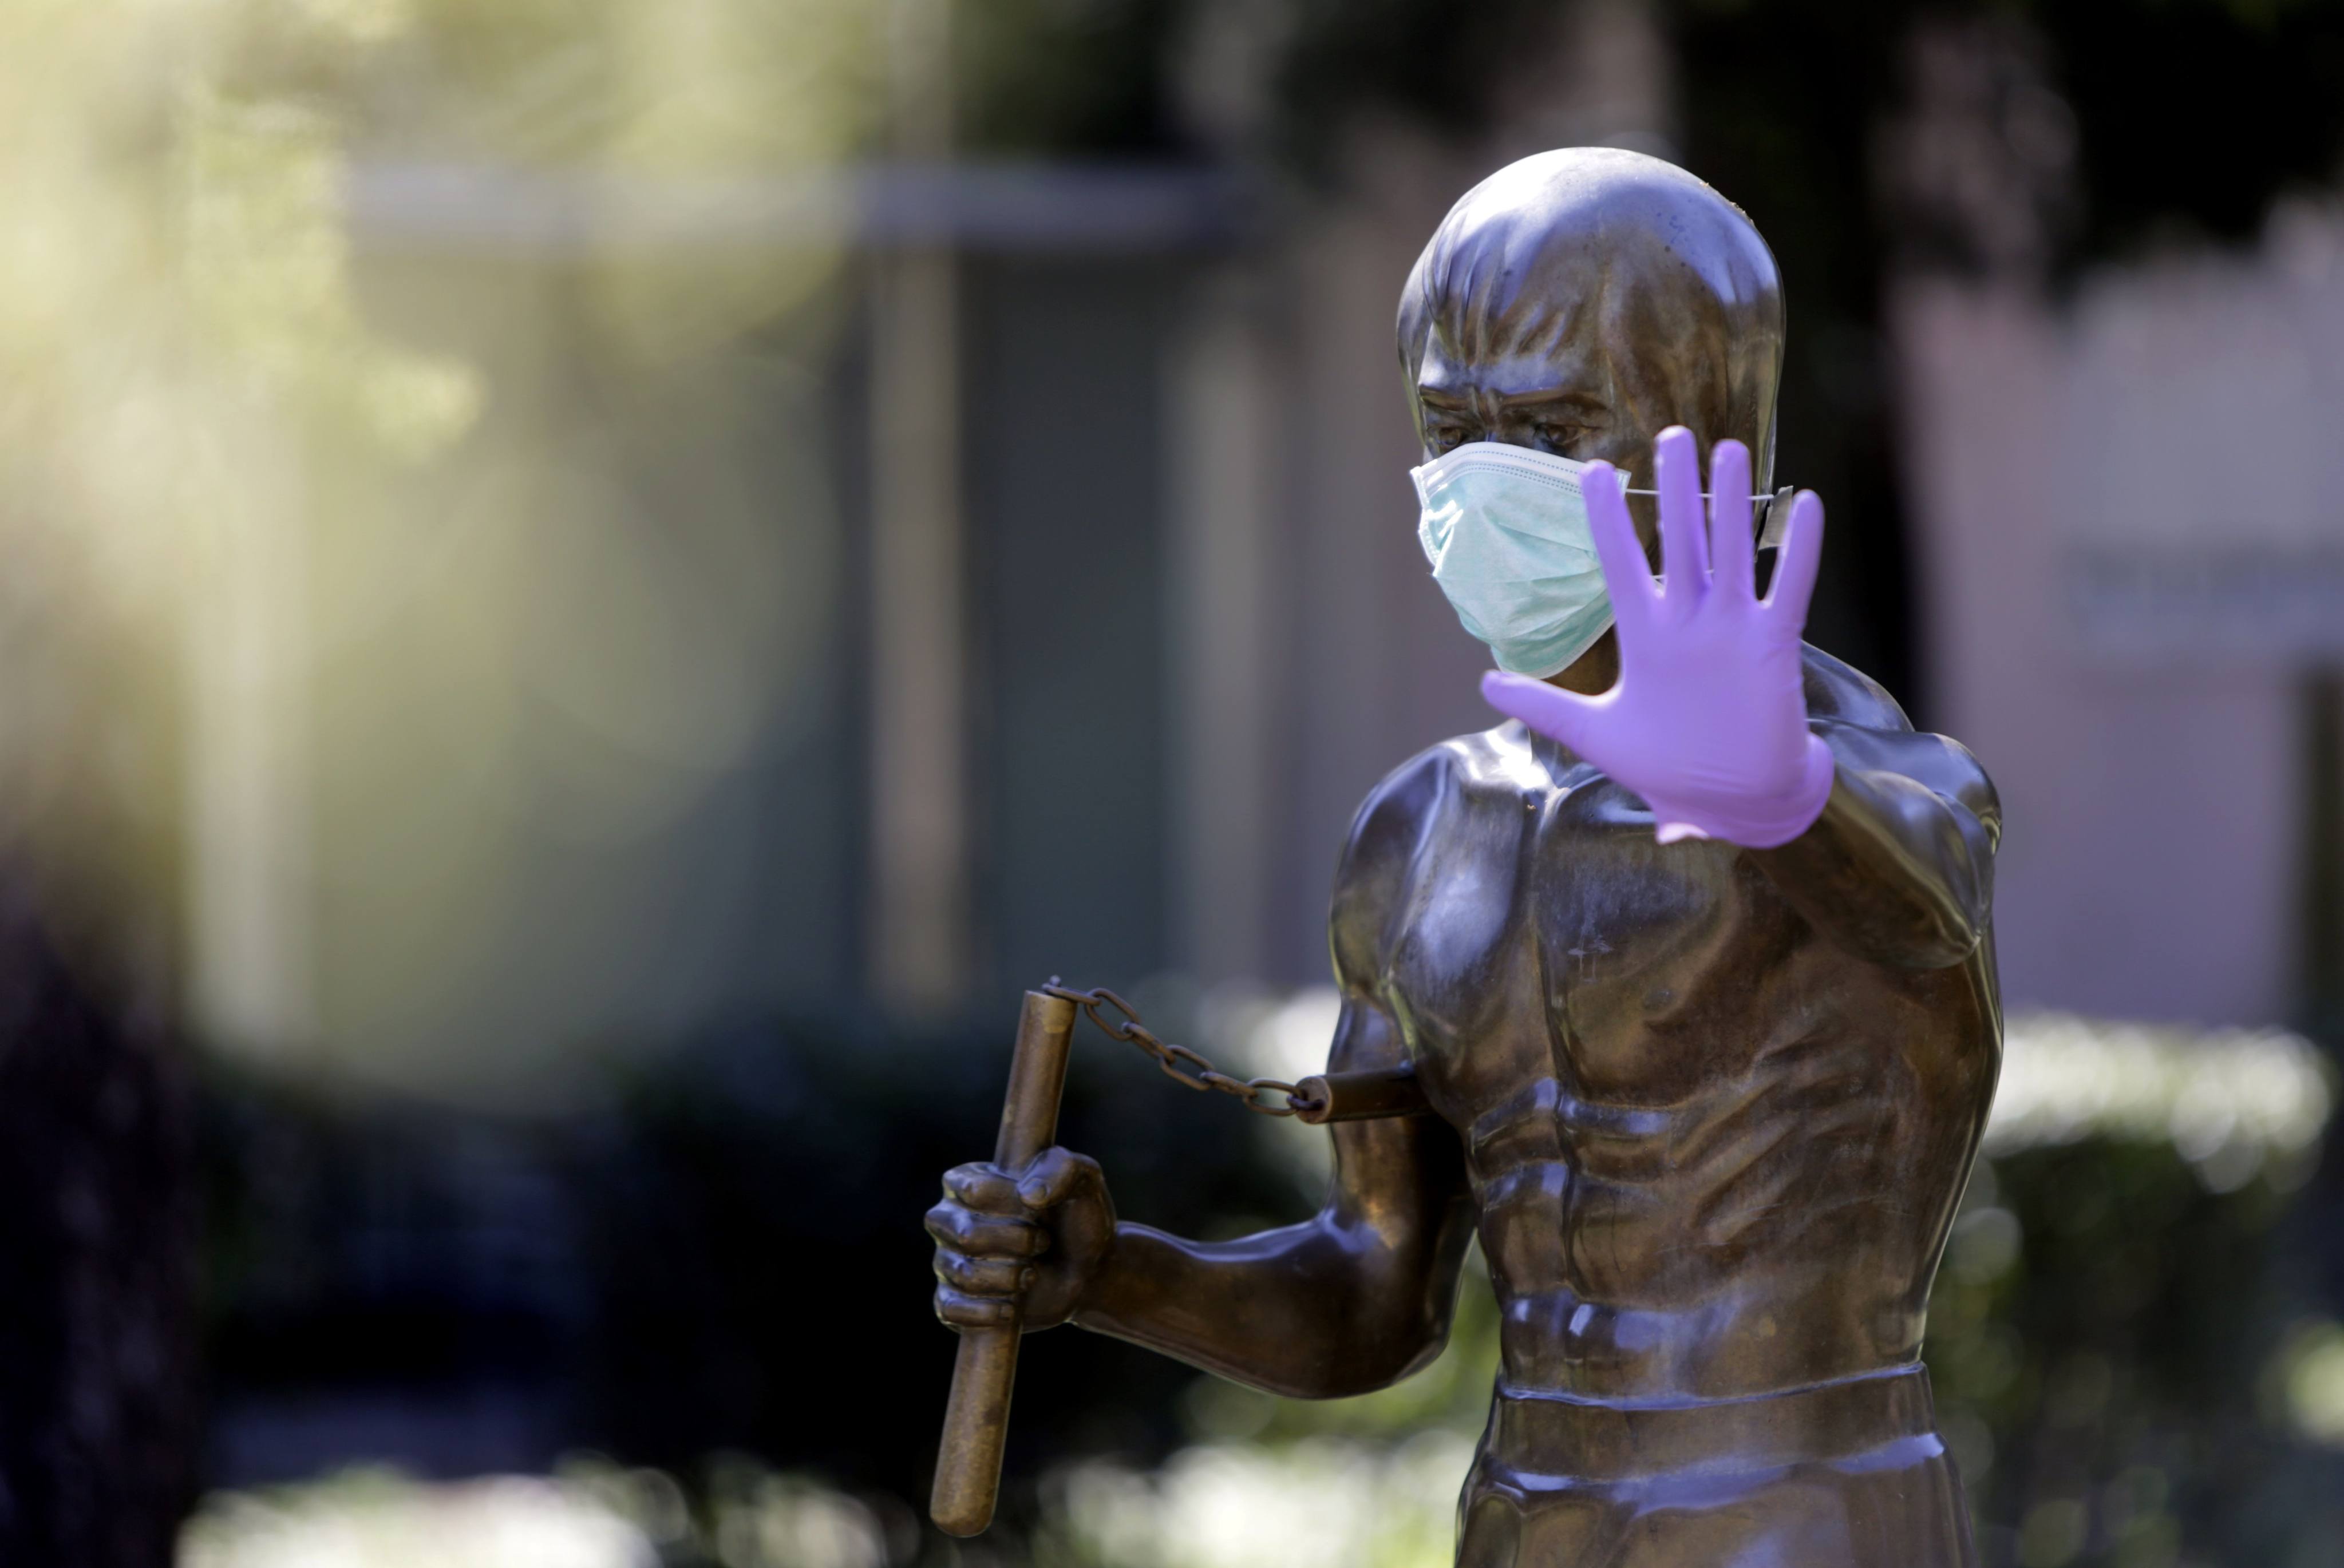 A statue dedicated to actor Bruce Lee is covered with surgical gloves and a face mask at a park in Mostar, Bosnia and Herzegovina. File photo: AFP